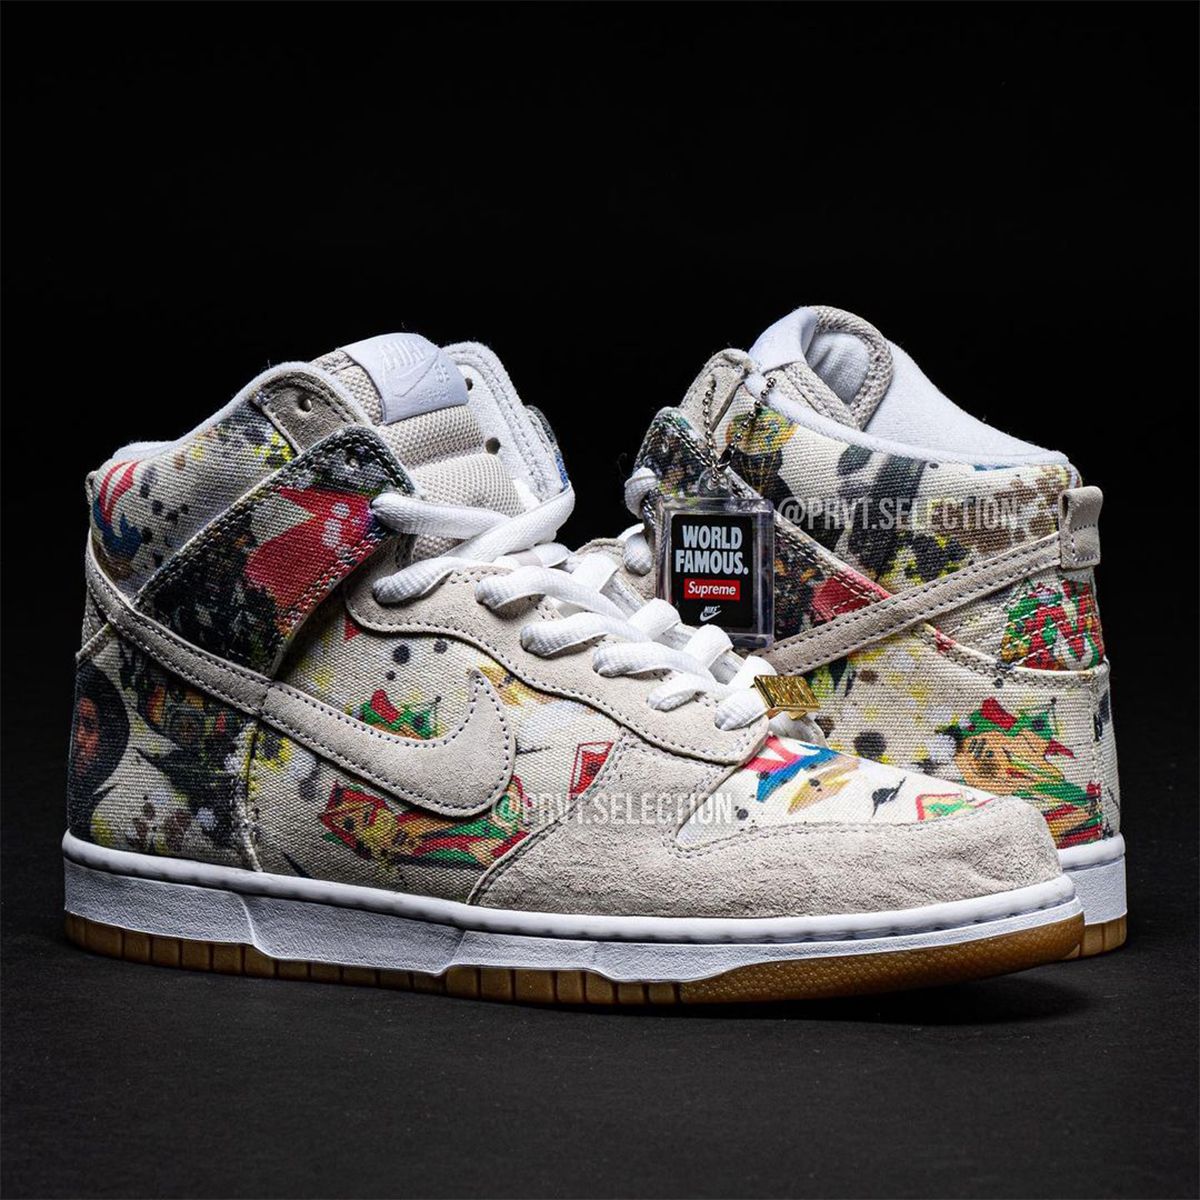 Supreme x Nike SB Dunk “Rammellzee Pack” Releases August 31